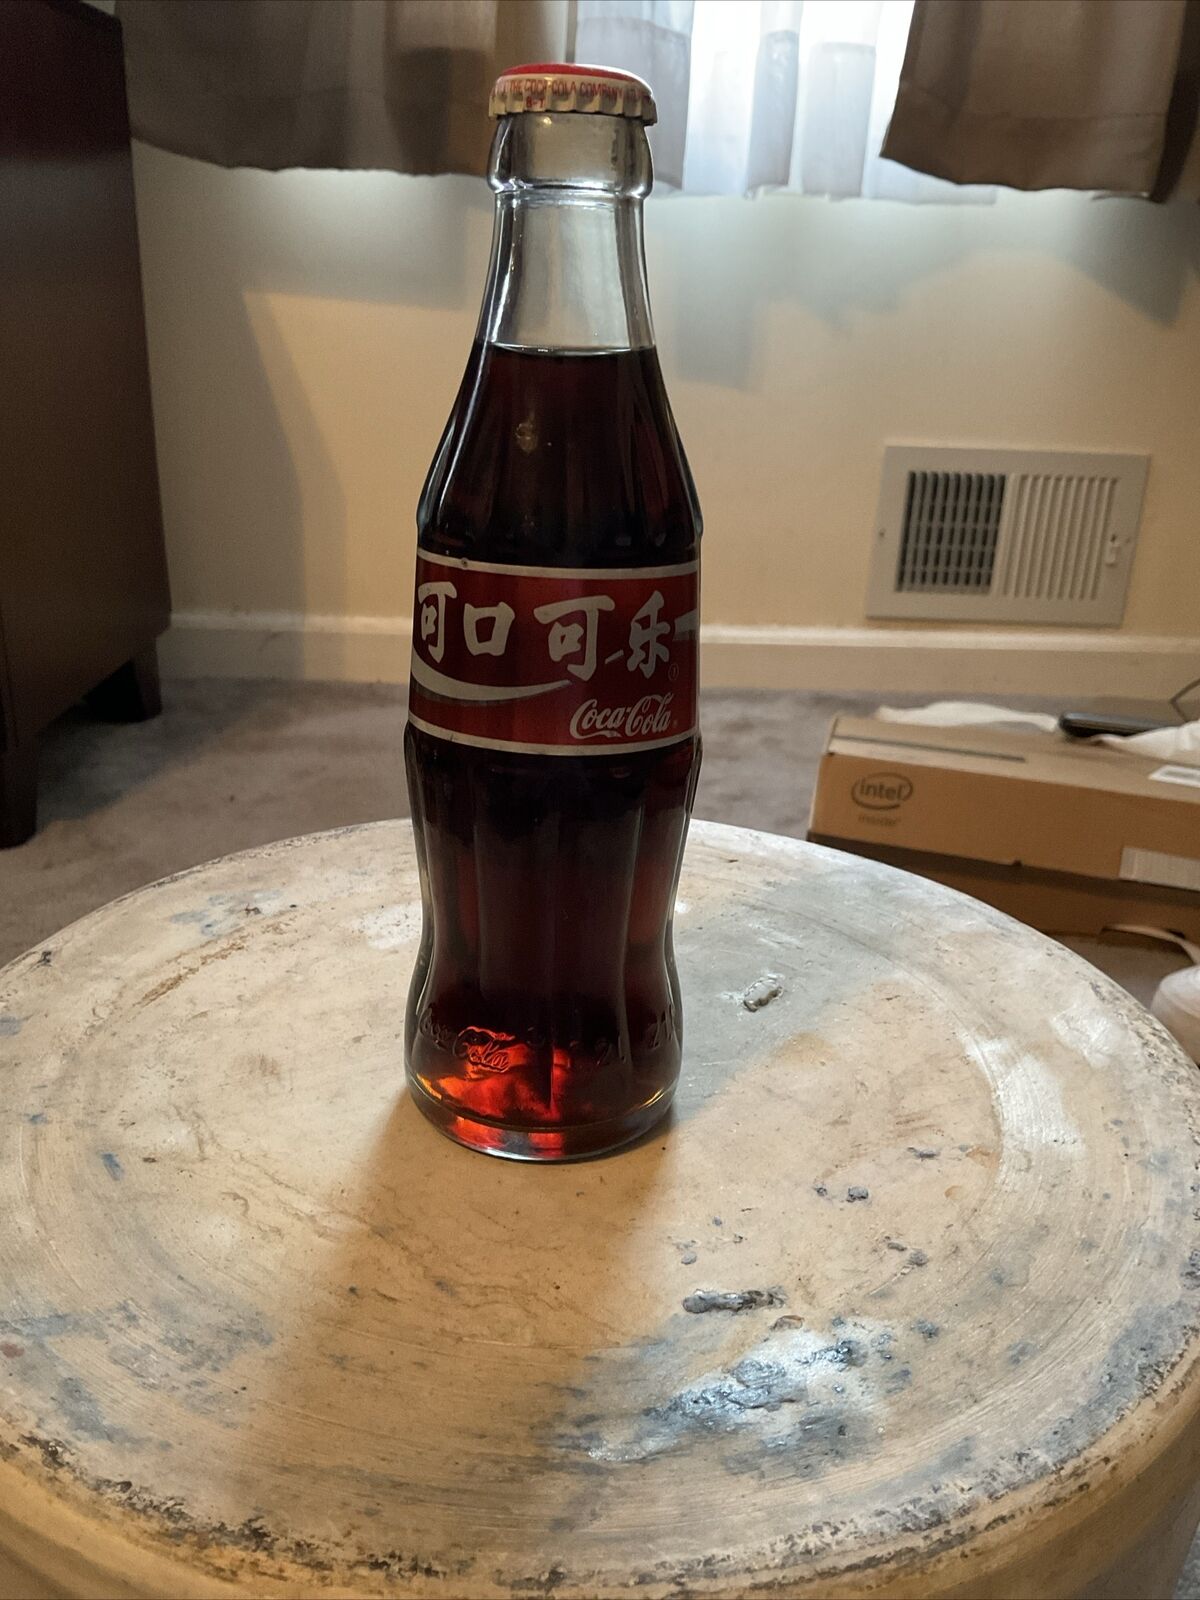 1992 Coca Cola Bottle China First McDonald’s